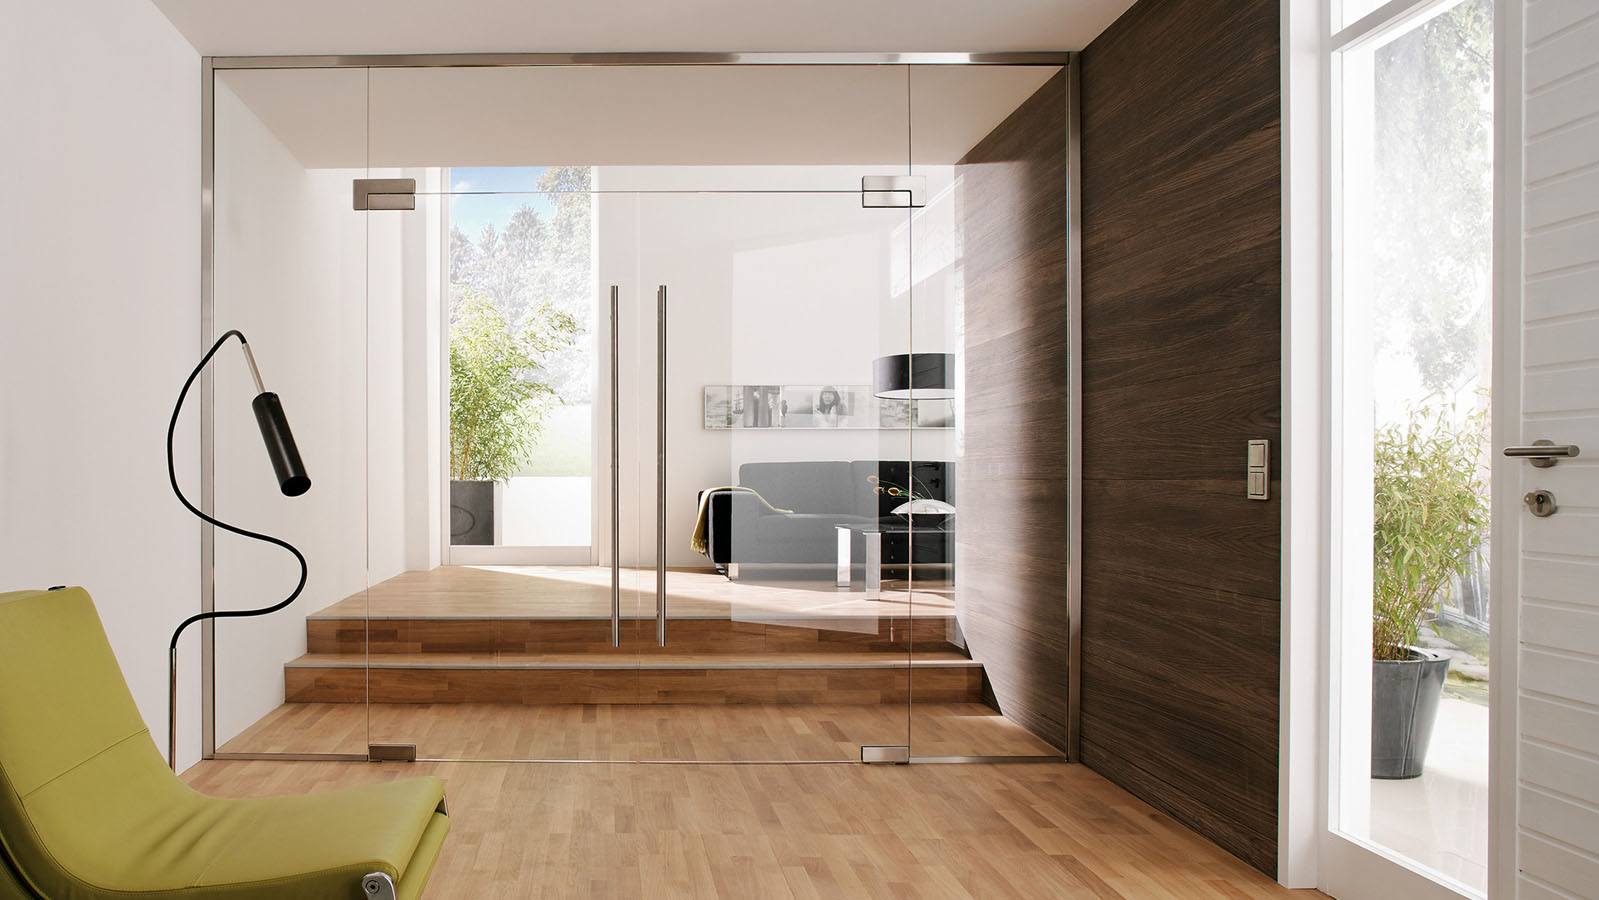 Interior Glass Doors: Best Design Ideas and Application. Laminated floor and planked wall